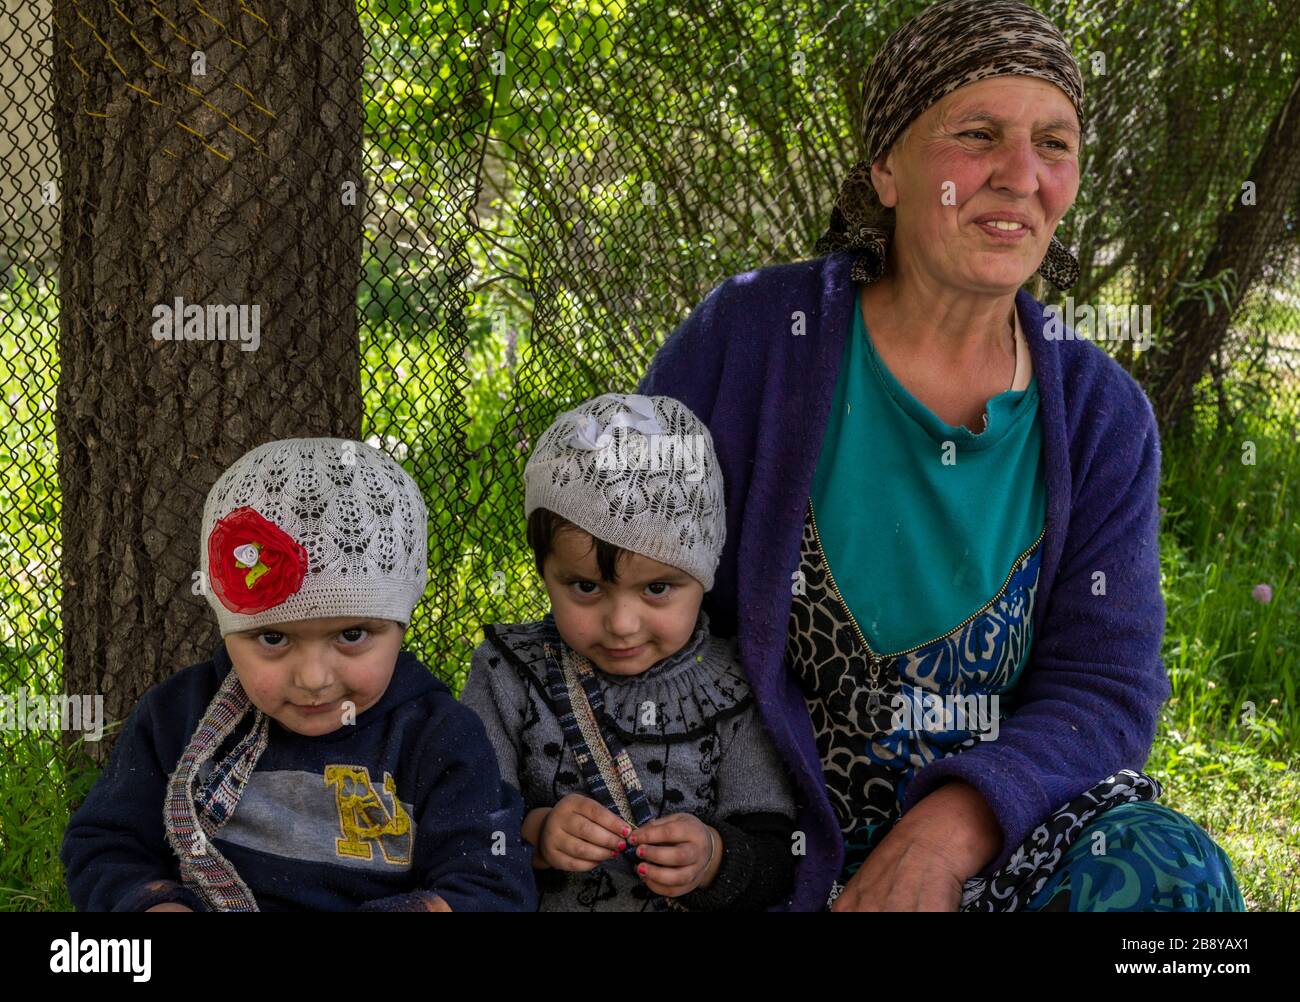 Bartang, Tajikistan - June 17, 2020: Family with mother and two children in the Bartang Vally at the Pamir Highway in Tajikistan. Stock Photo